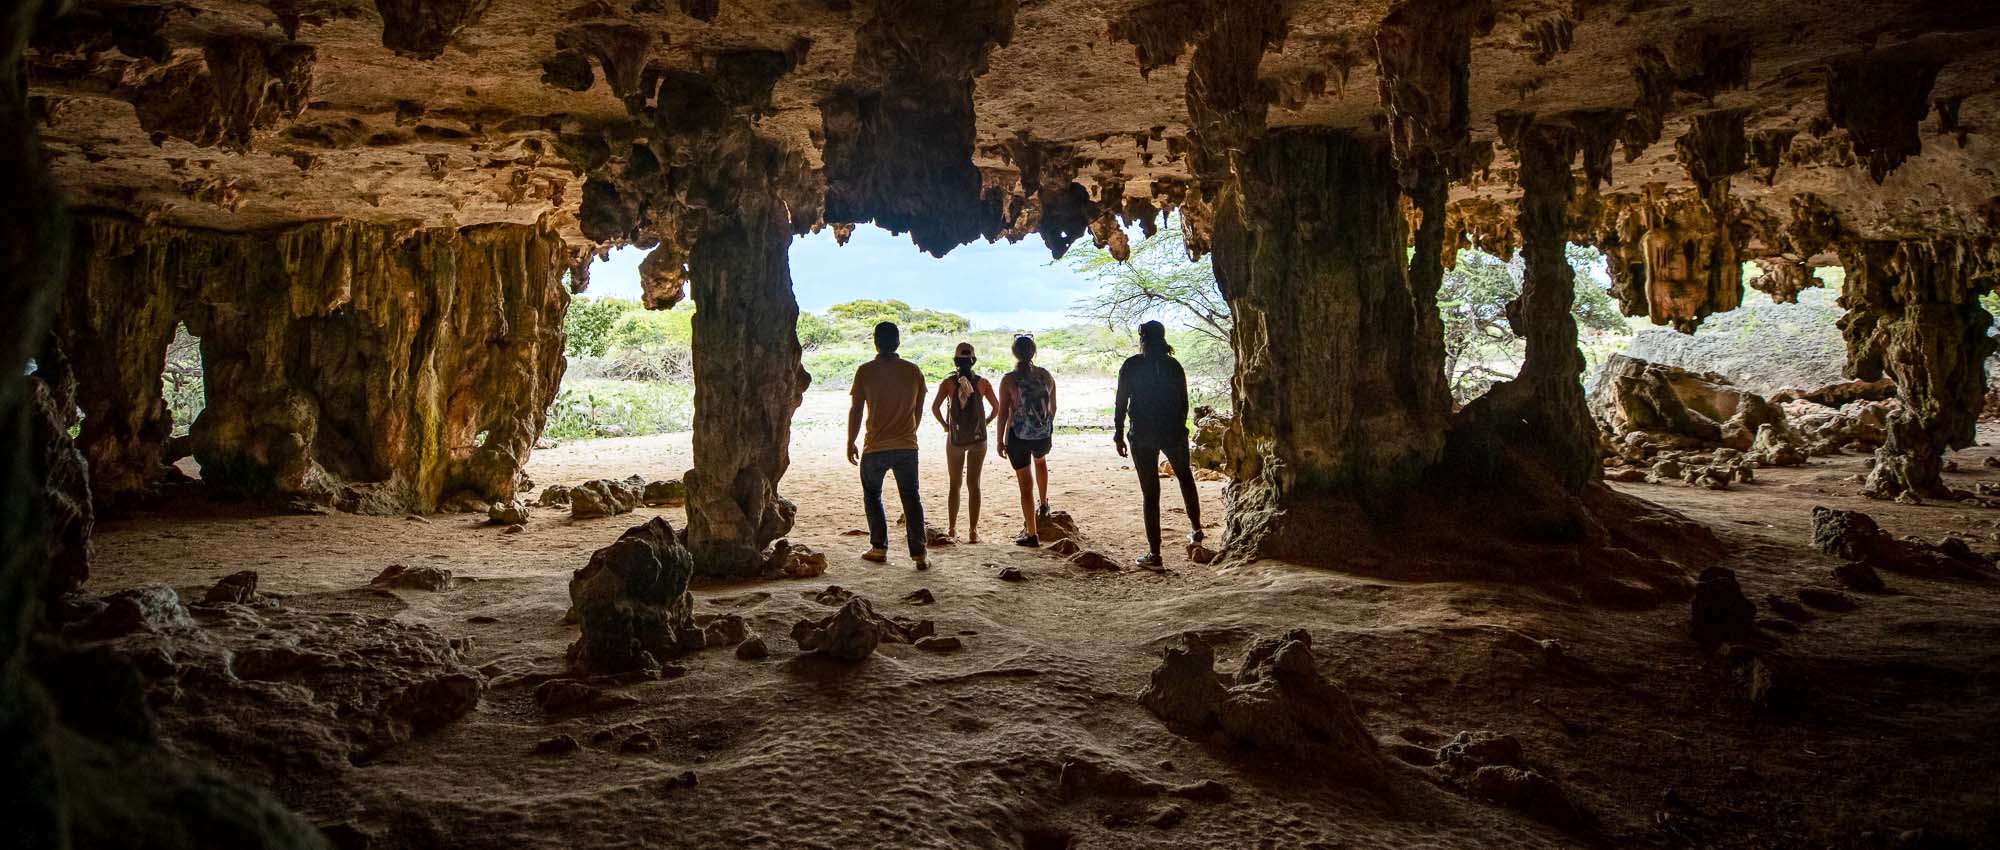 Group of people in cave